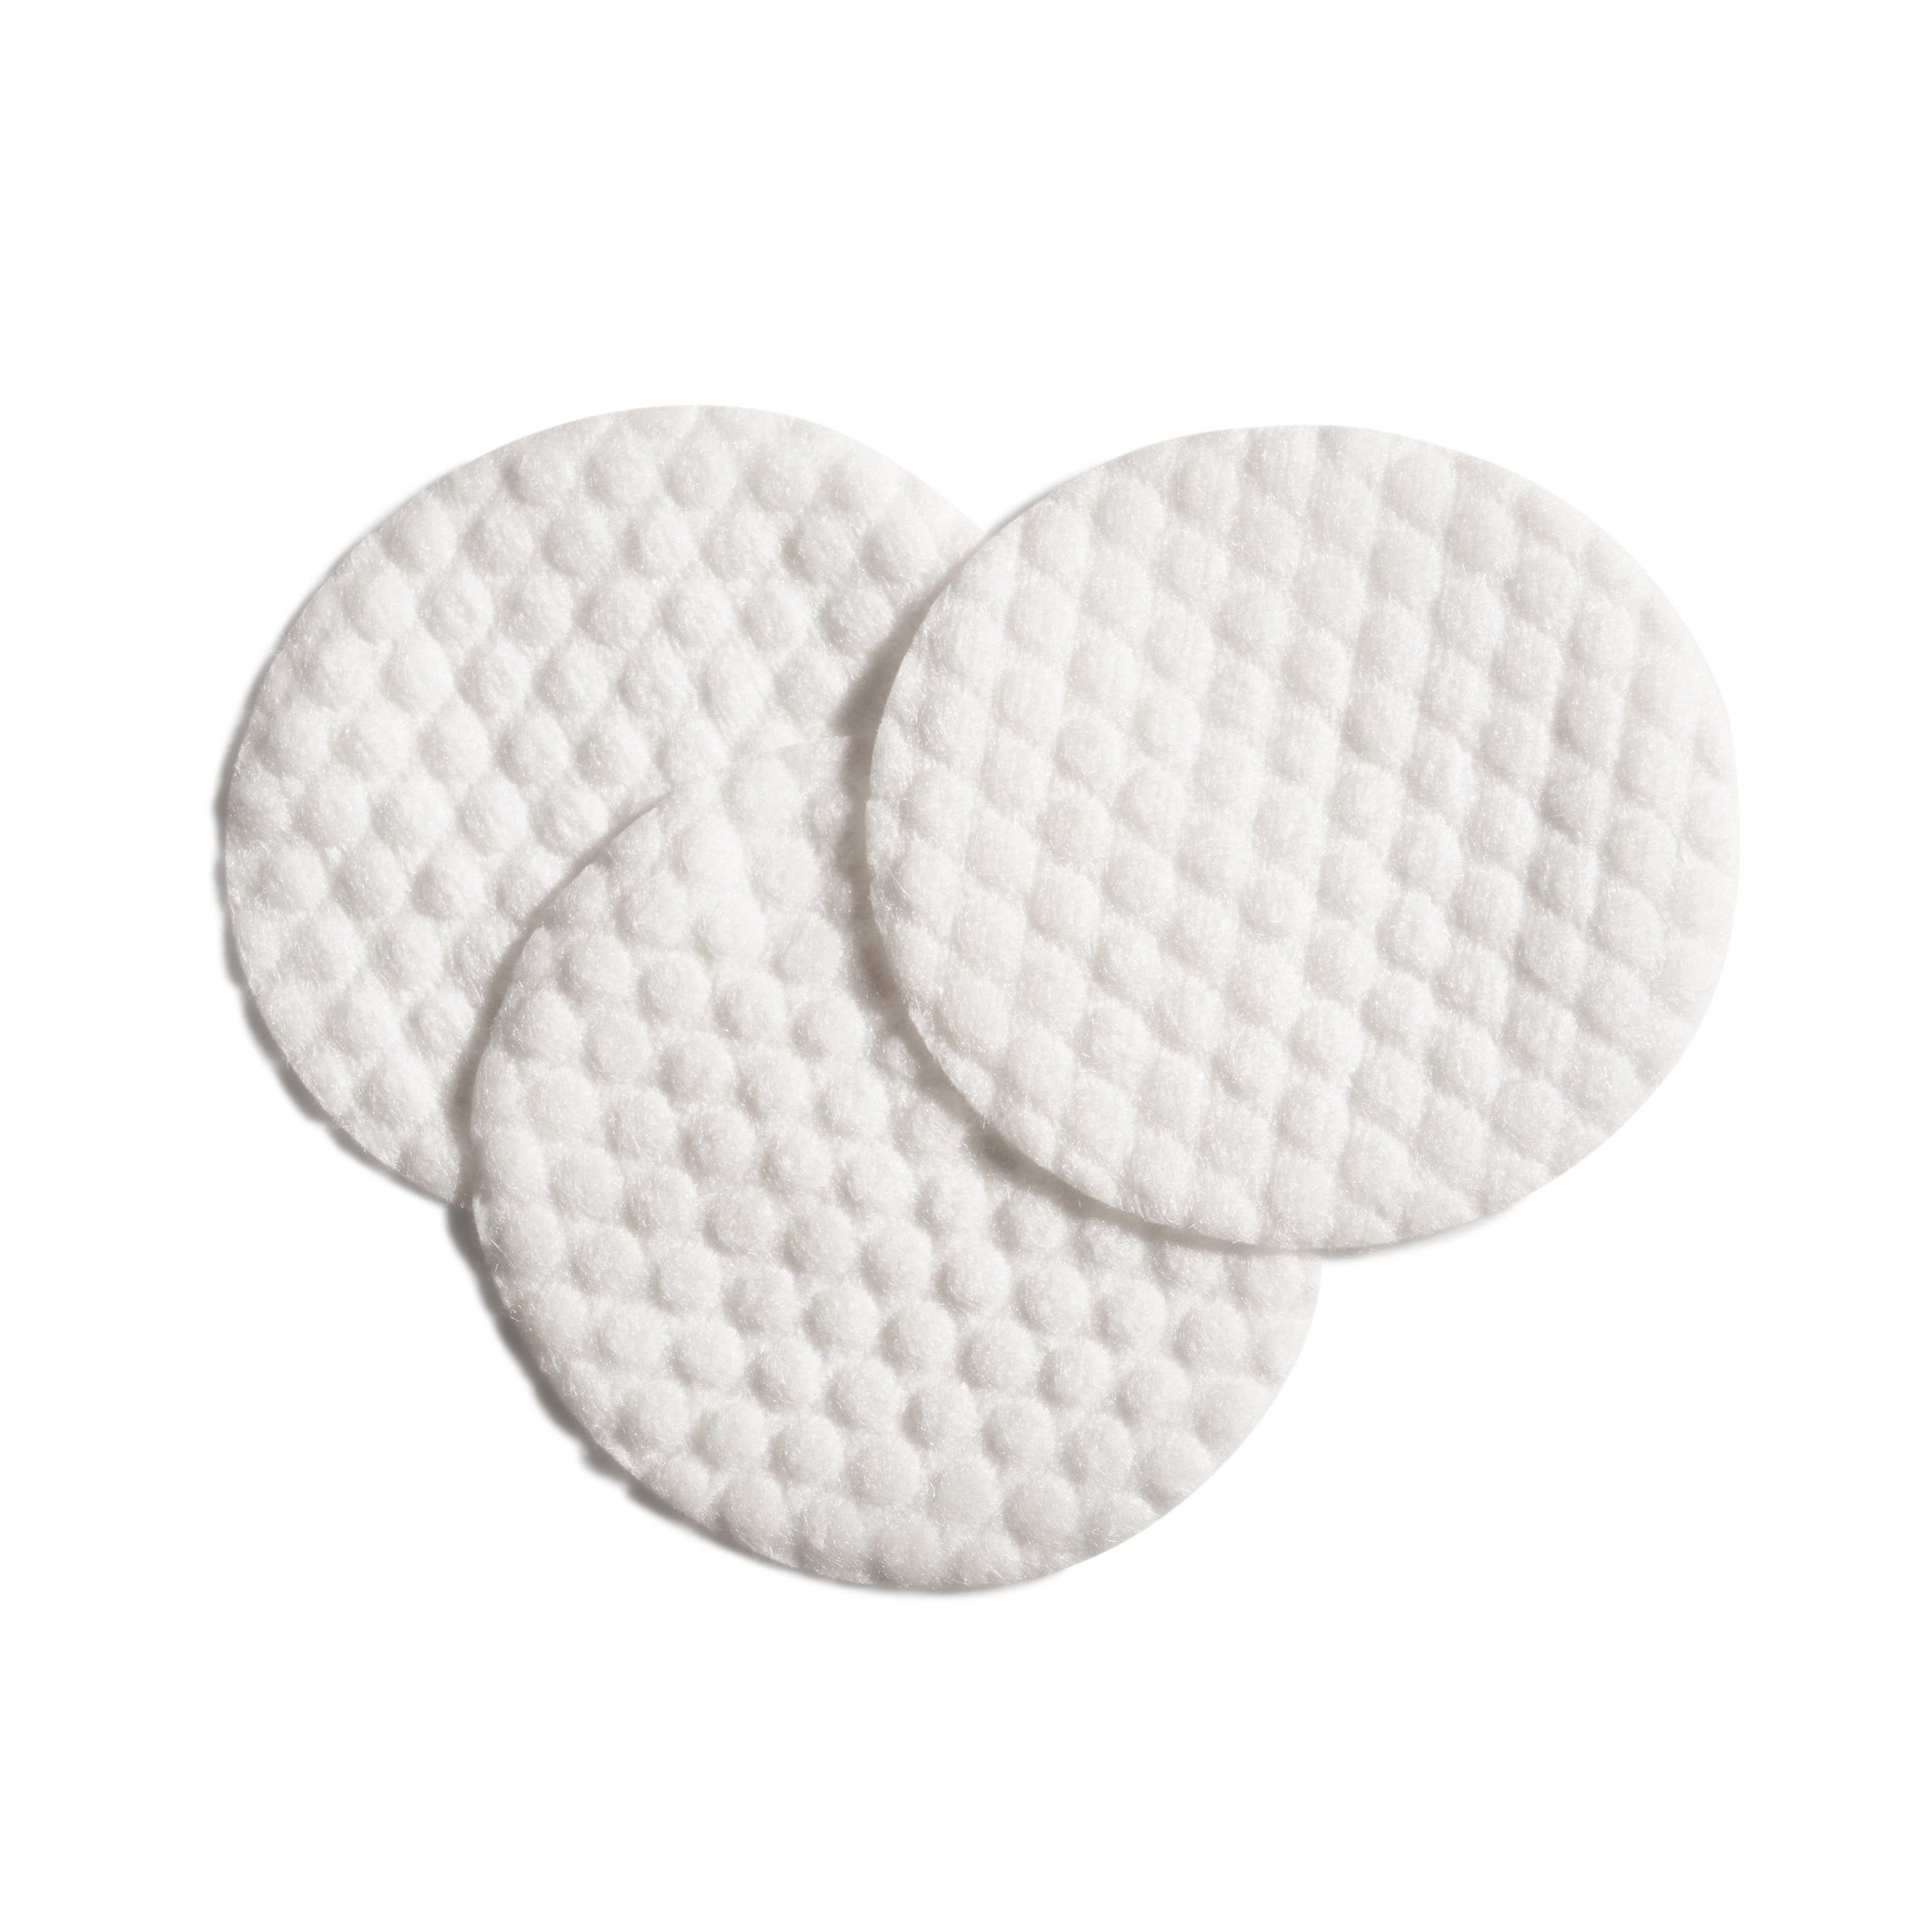 HIGHER EDUCATION EASY A® Glycolic Acid Exfoliating Pads